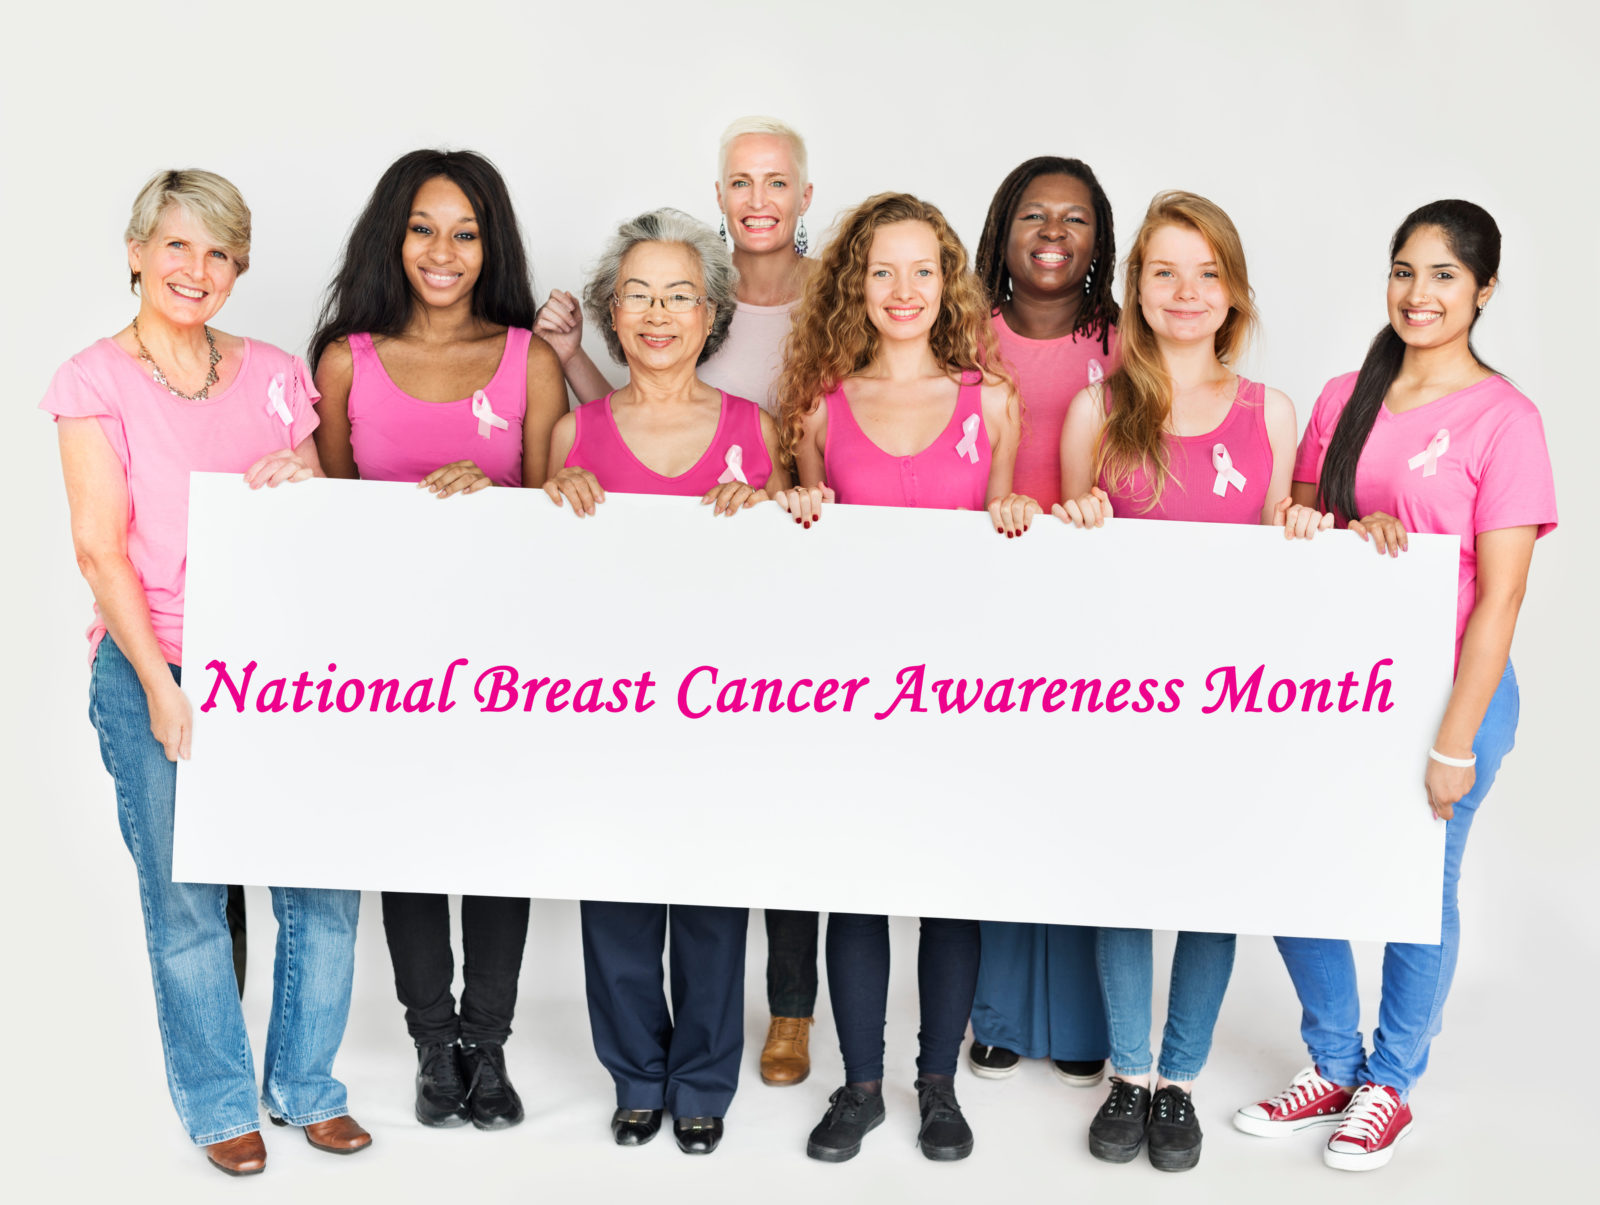 Group of women of various ages wearing different shades of pink shirts, holding National Breast Cancer Awareness Month sign.